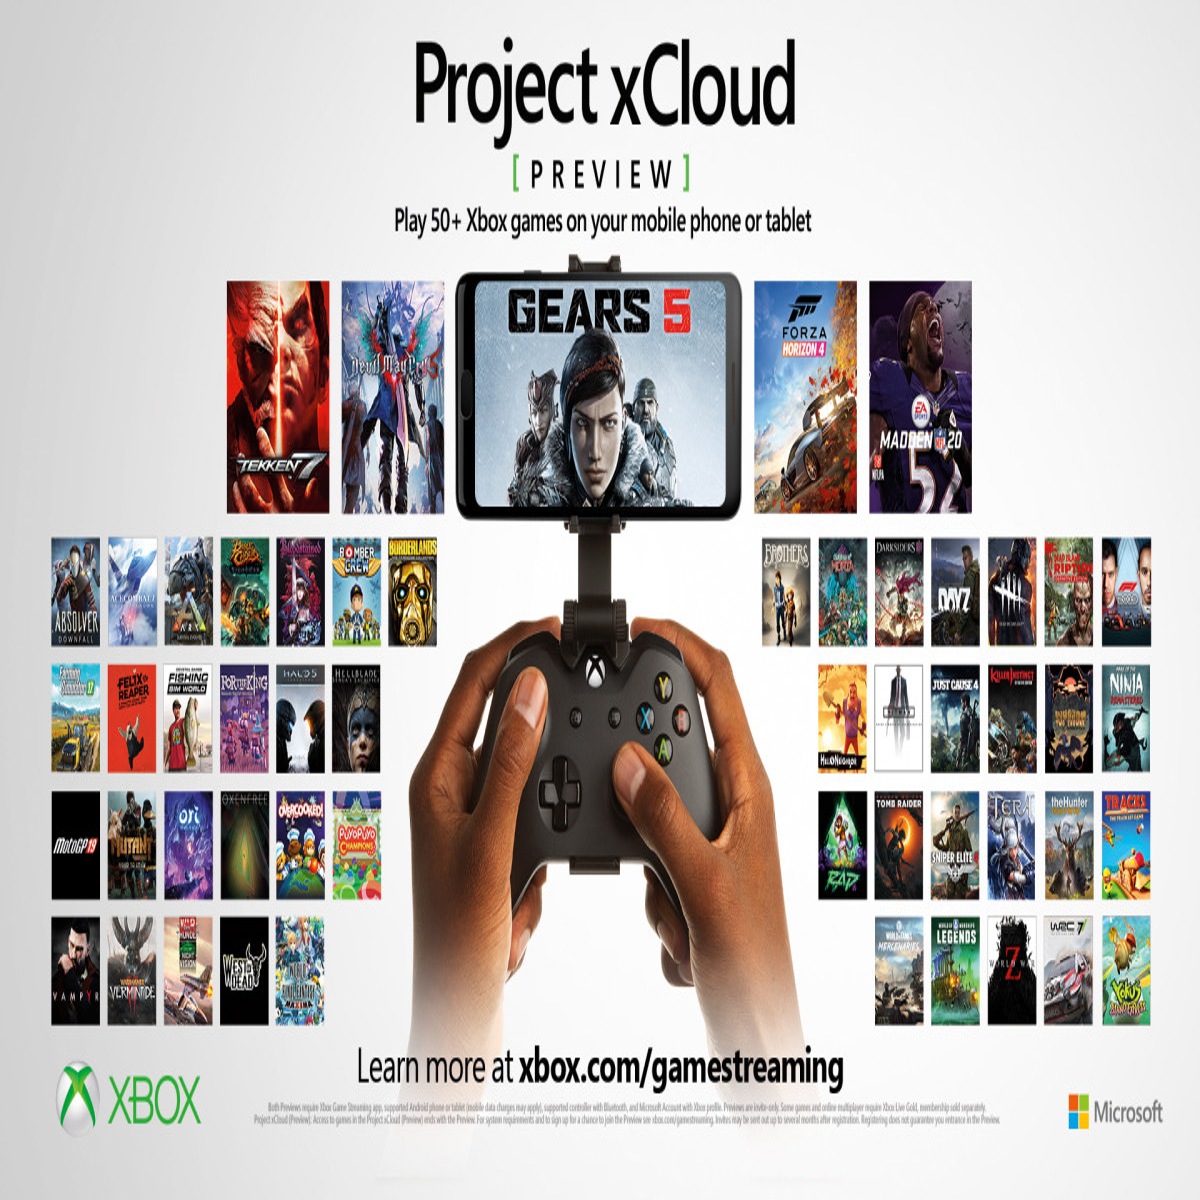 Xbox: People are using xCloud to create couch co-op